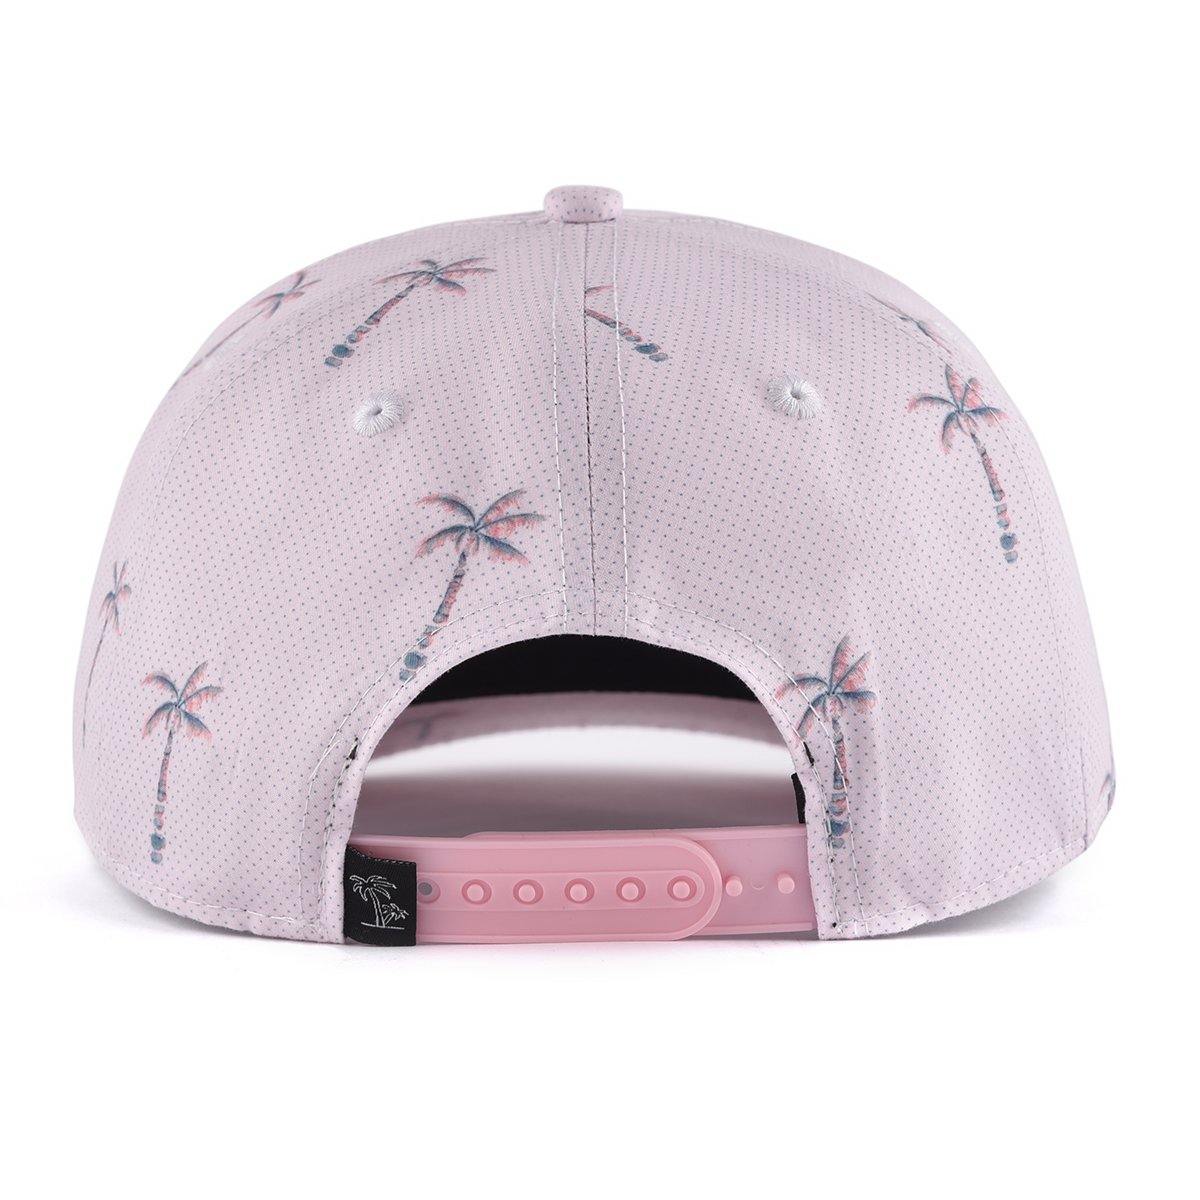 Paradise palm snapback baseball cap for babies, toddlers, kids and women. Cubs & Co. Australia